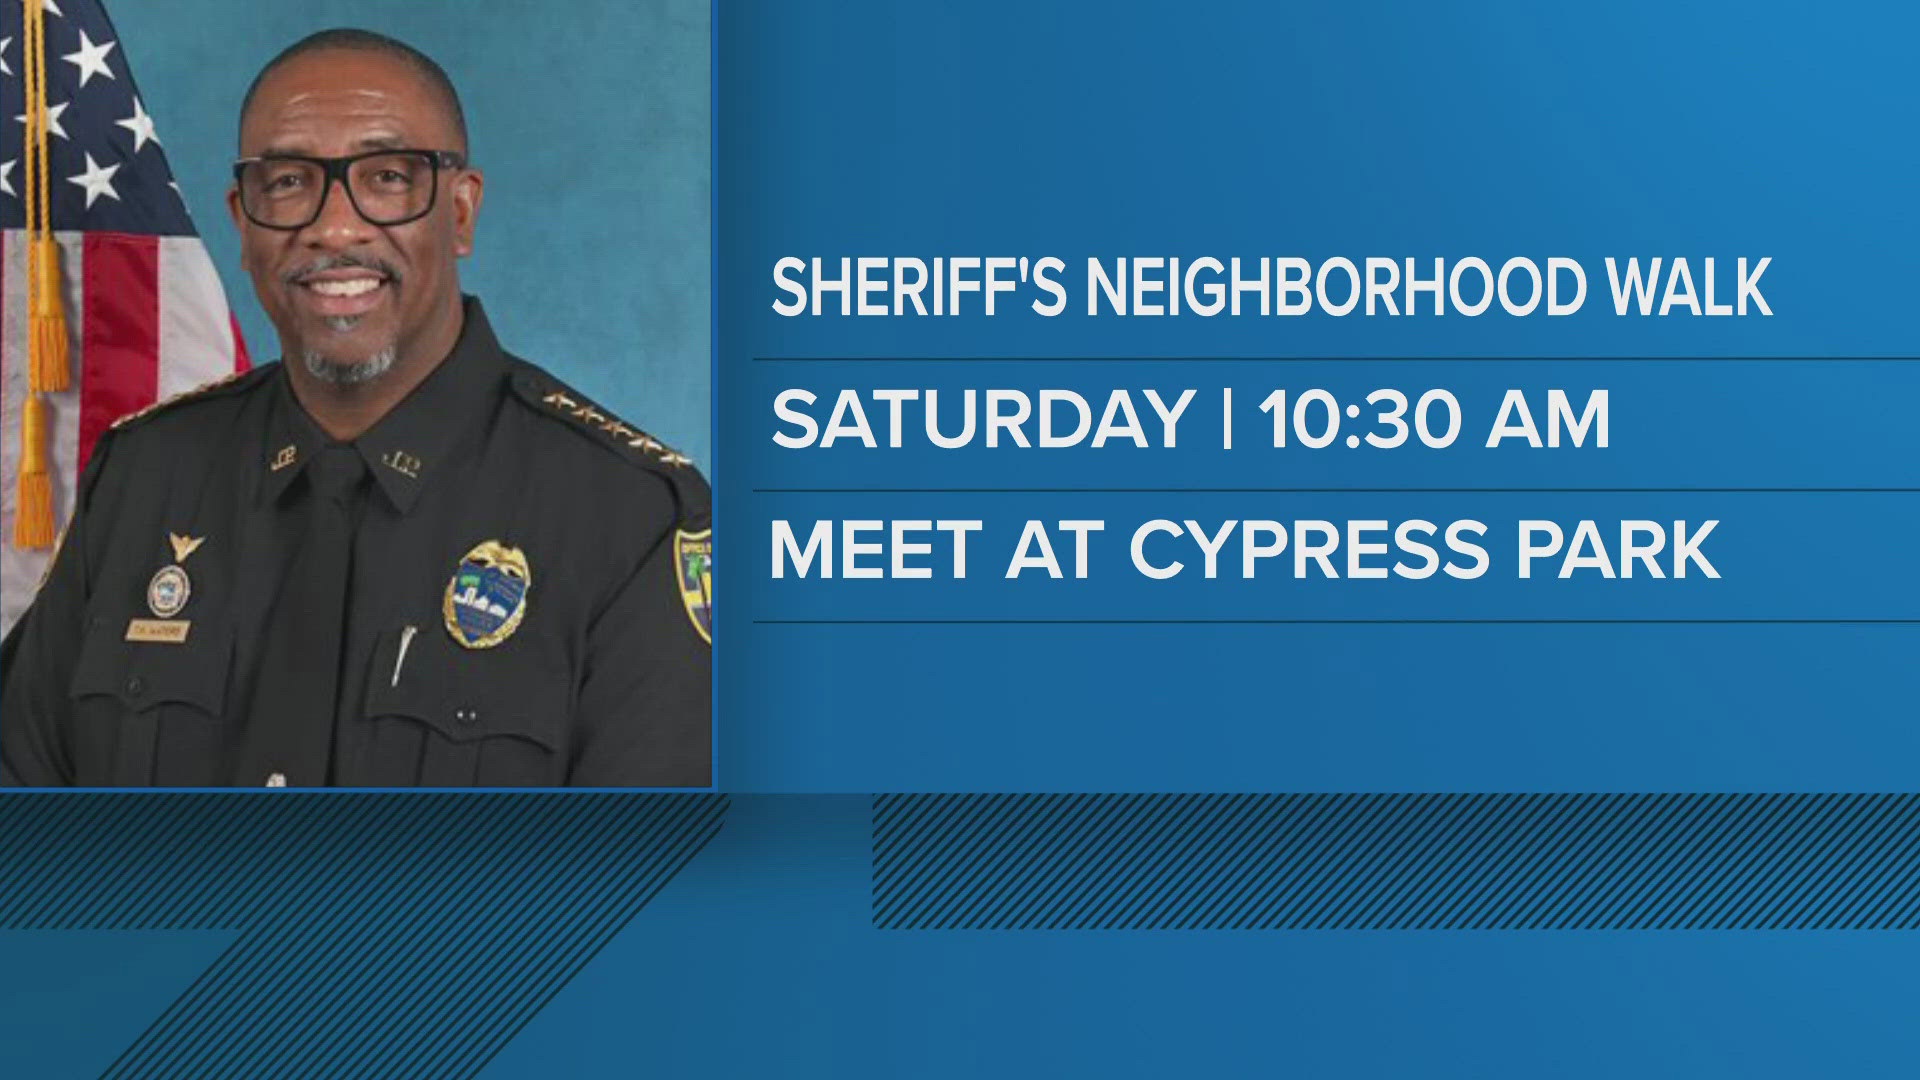 The crime prevention neighborhood walk begins at 10:30 a.m. at Cypress Park.